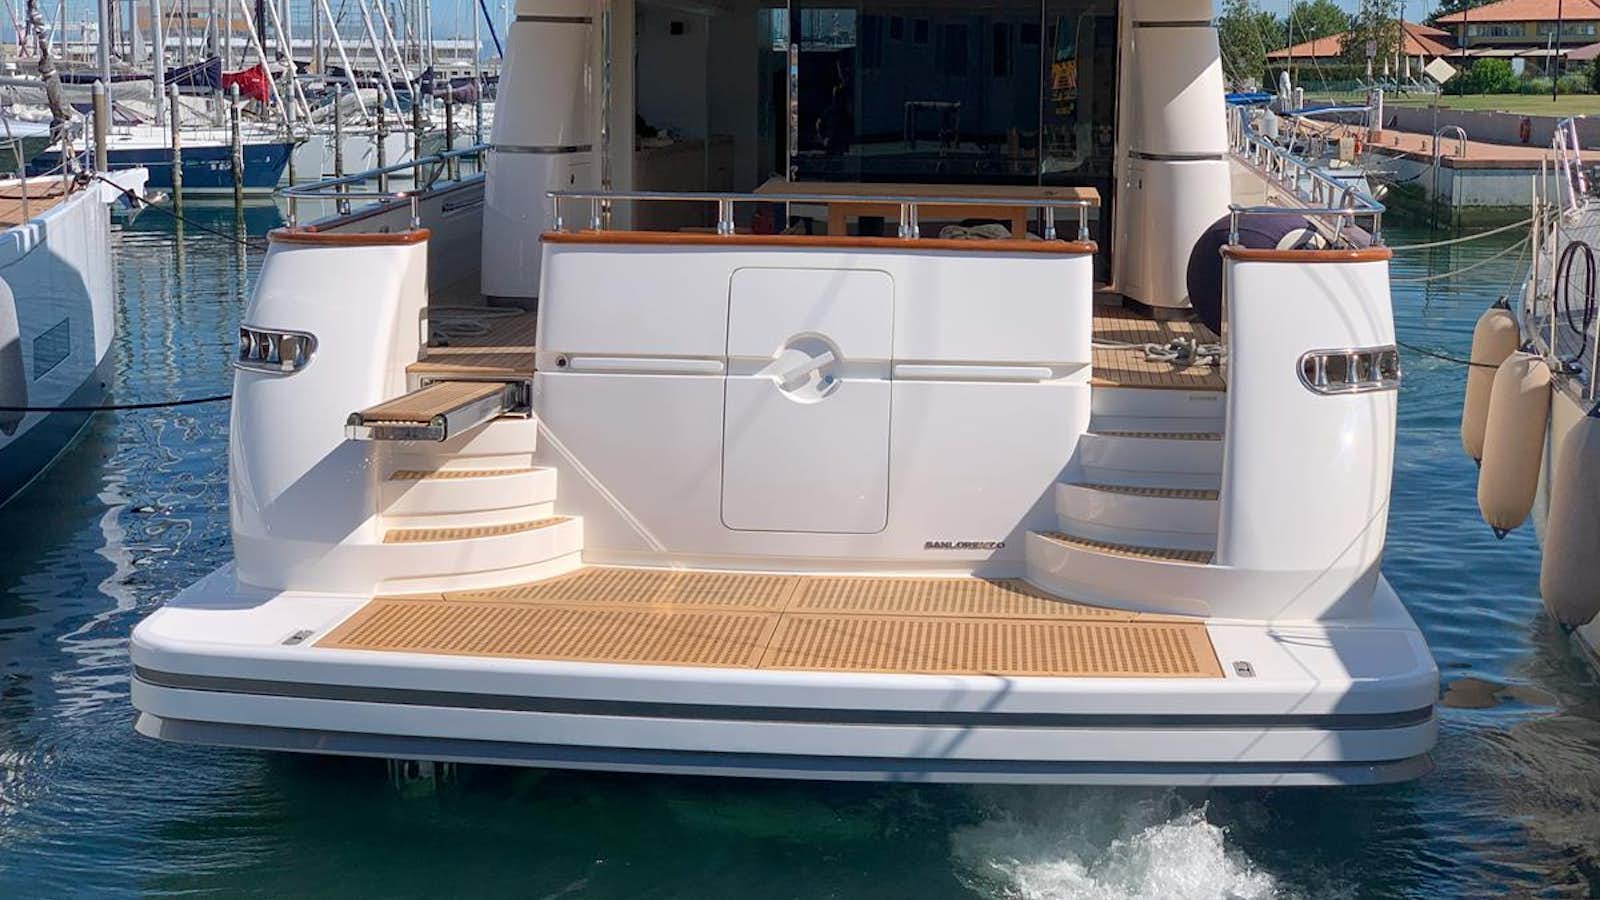 Sl 82
Yacht for Sale